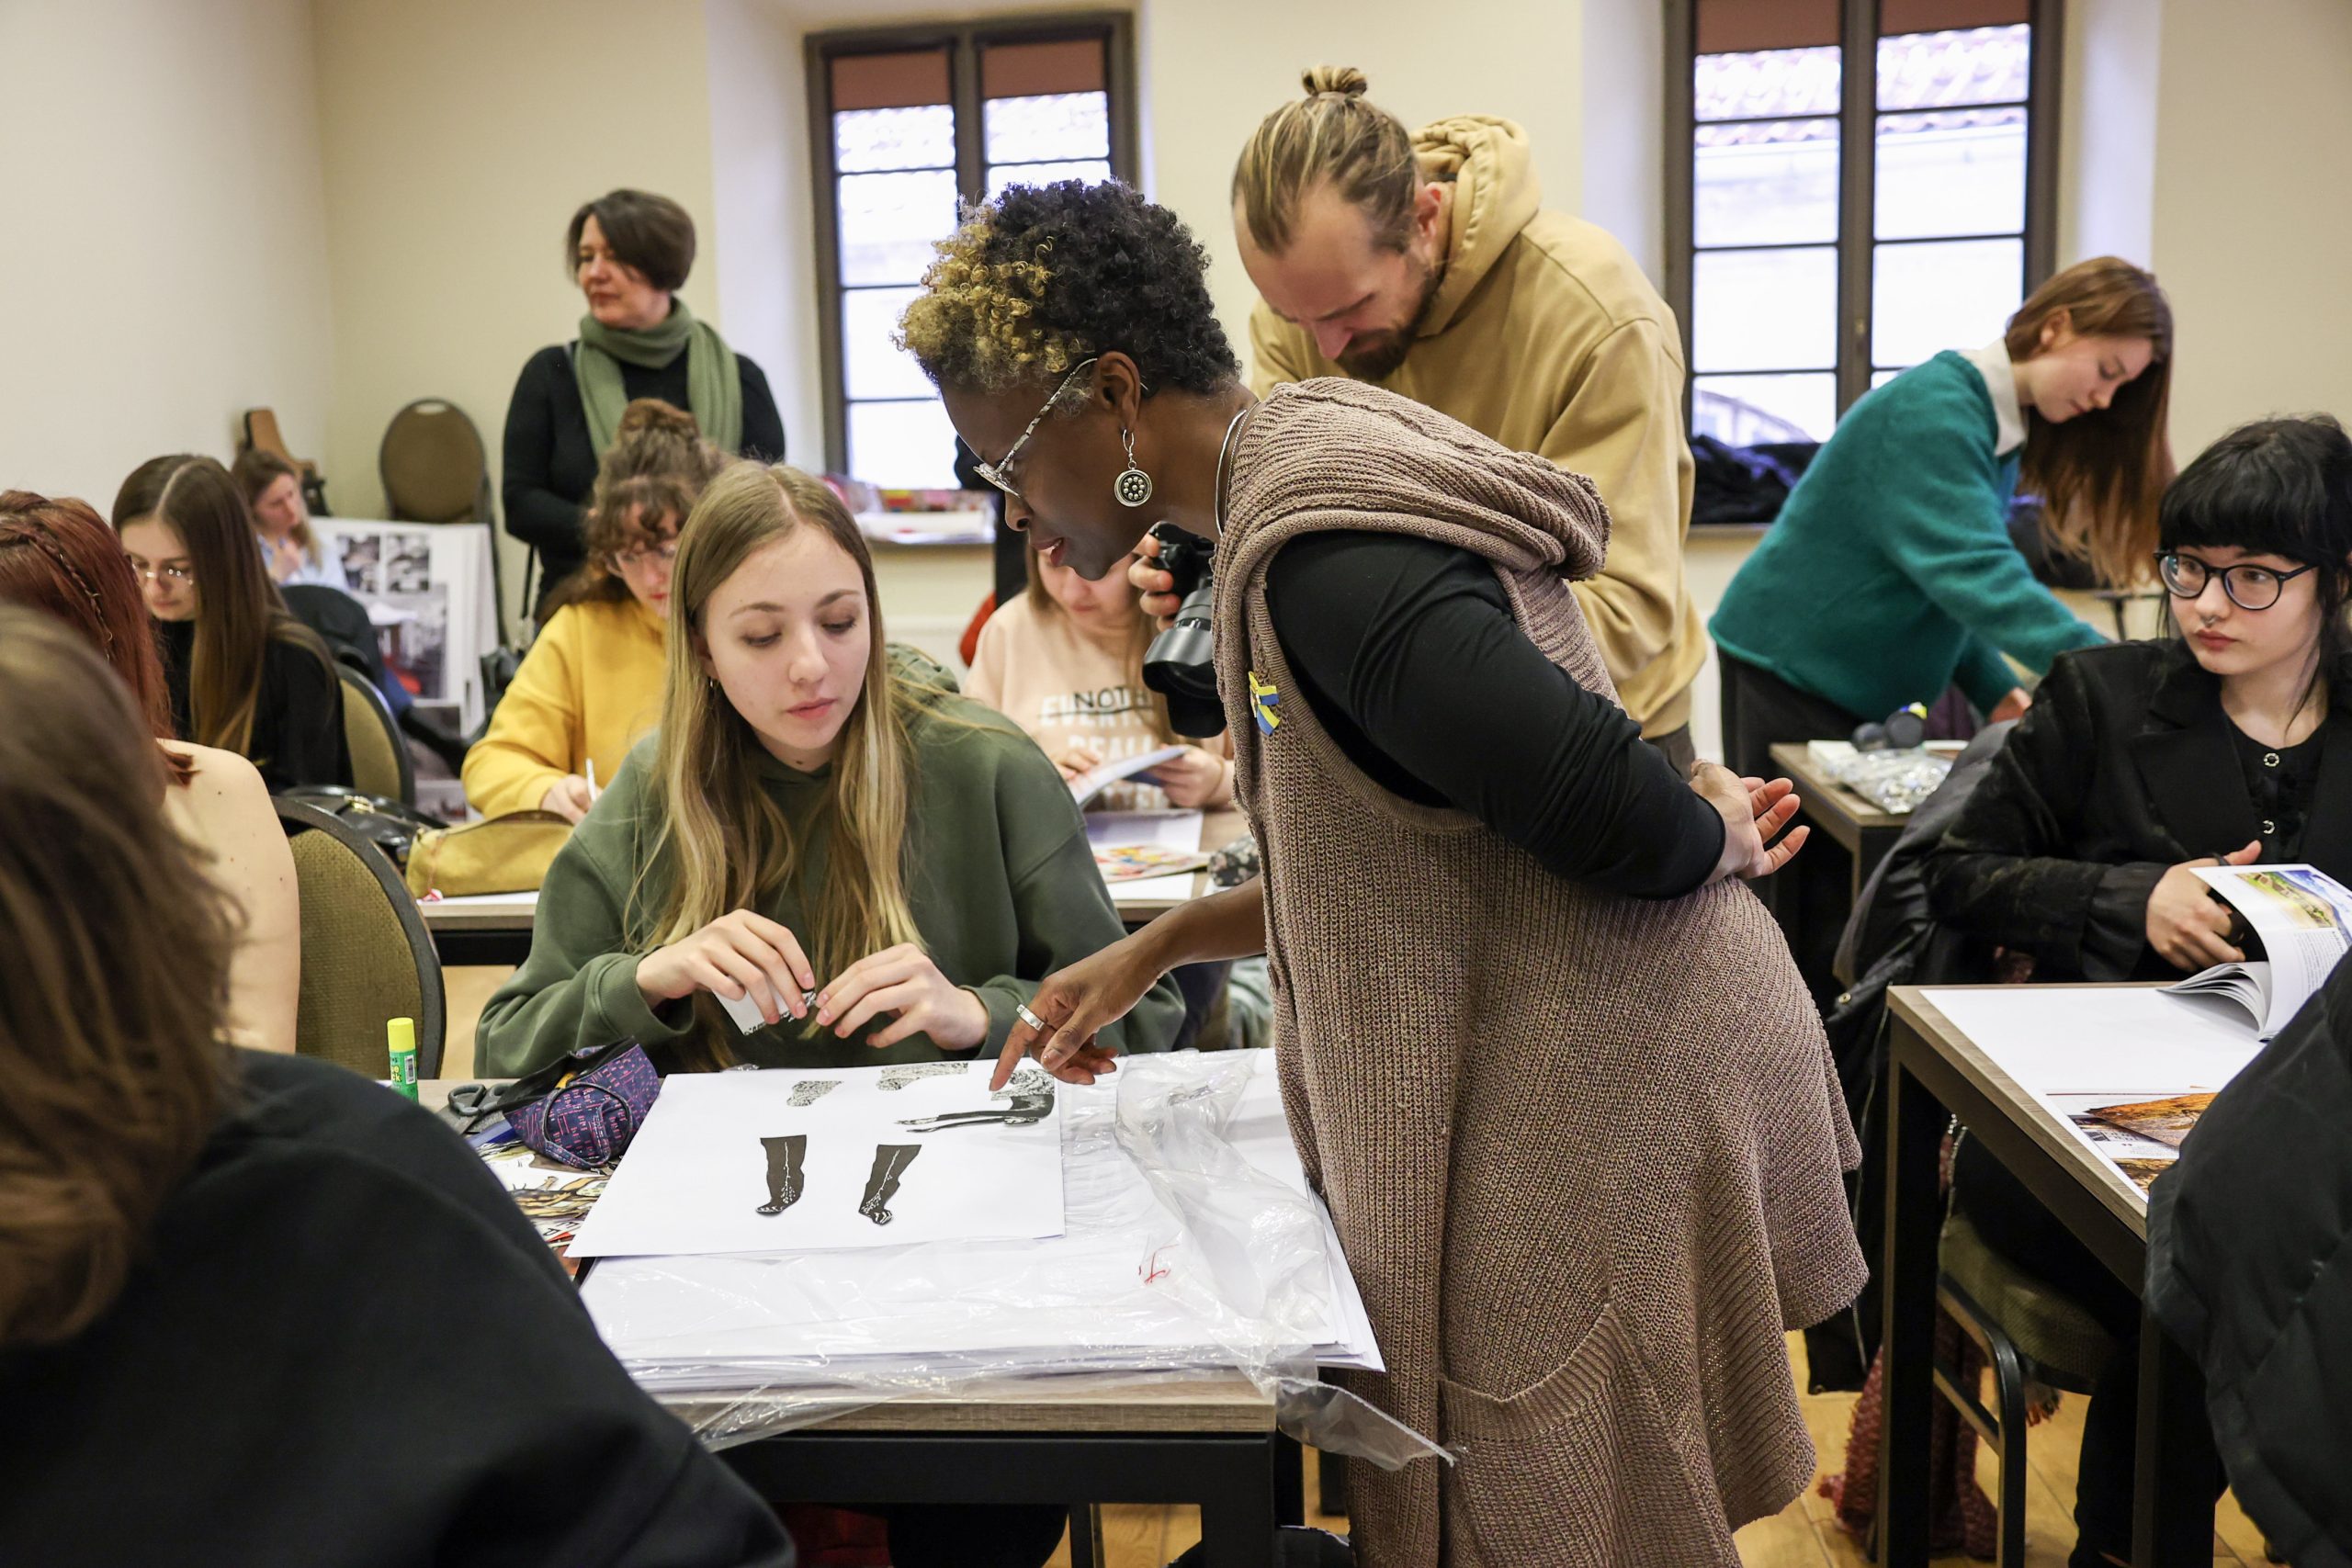 That afternoon, Charlton lead a practice-based workshop with students at European Humanities University where the students used collage to explore what belonging means to them.